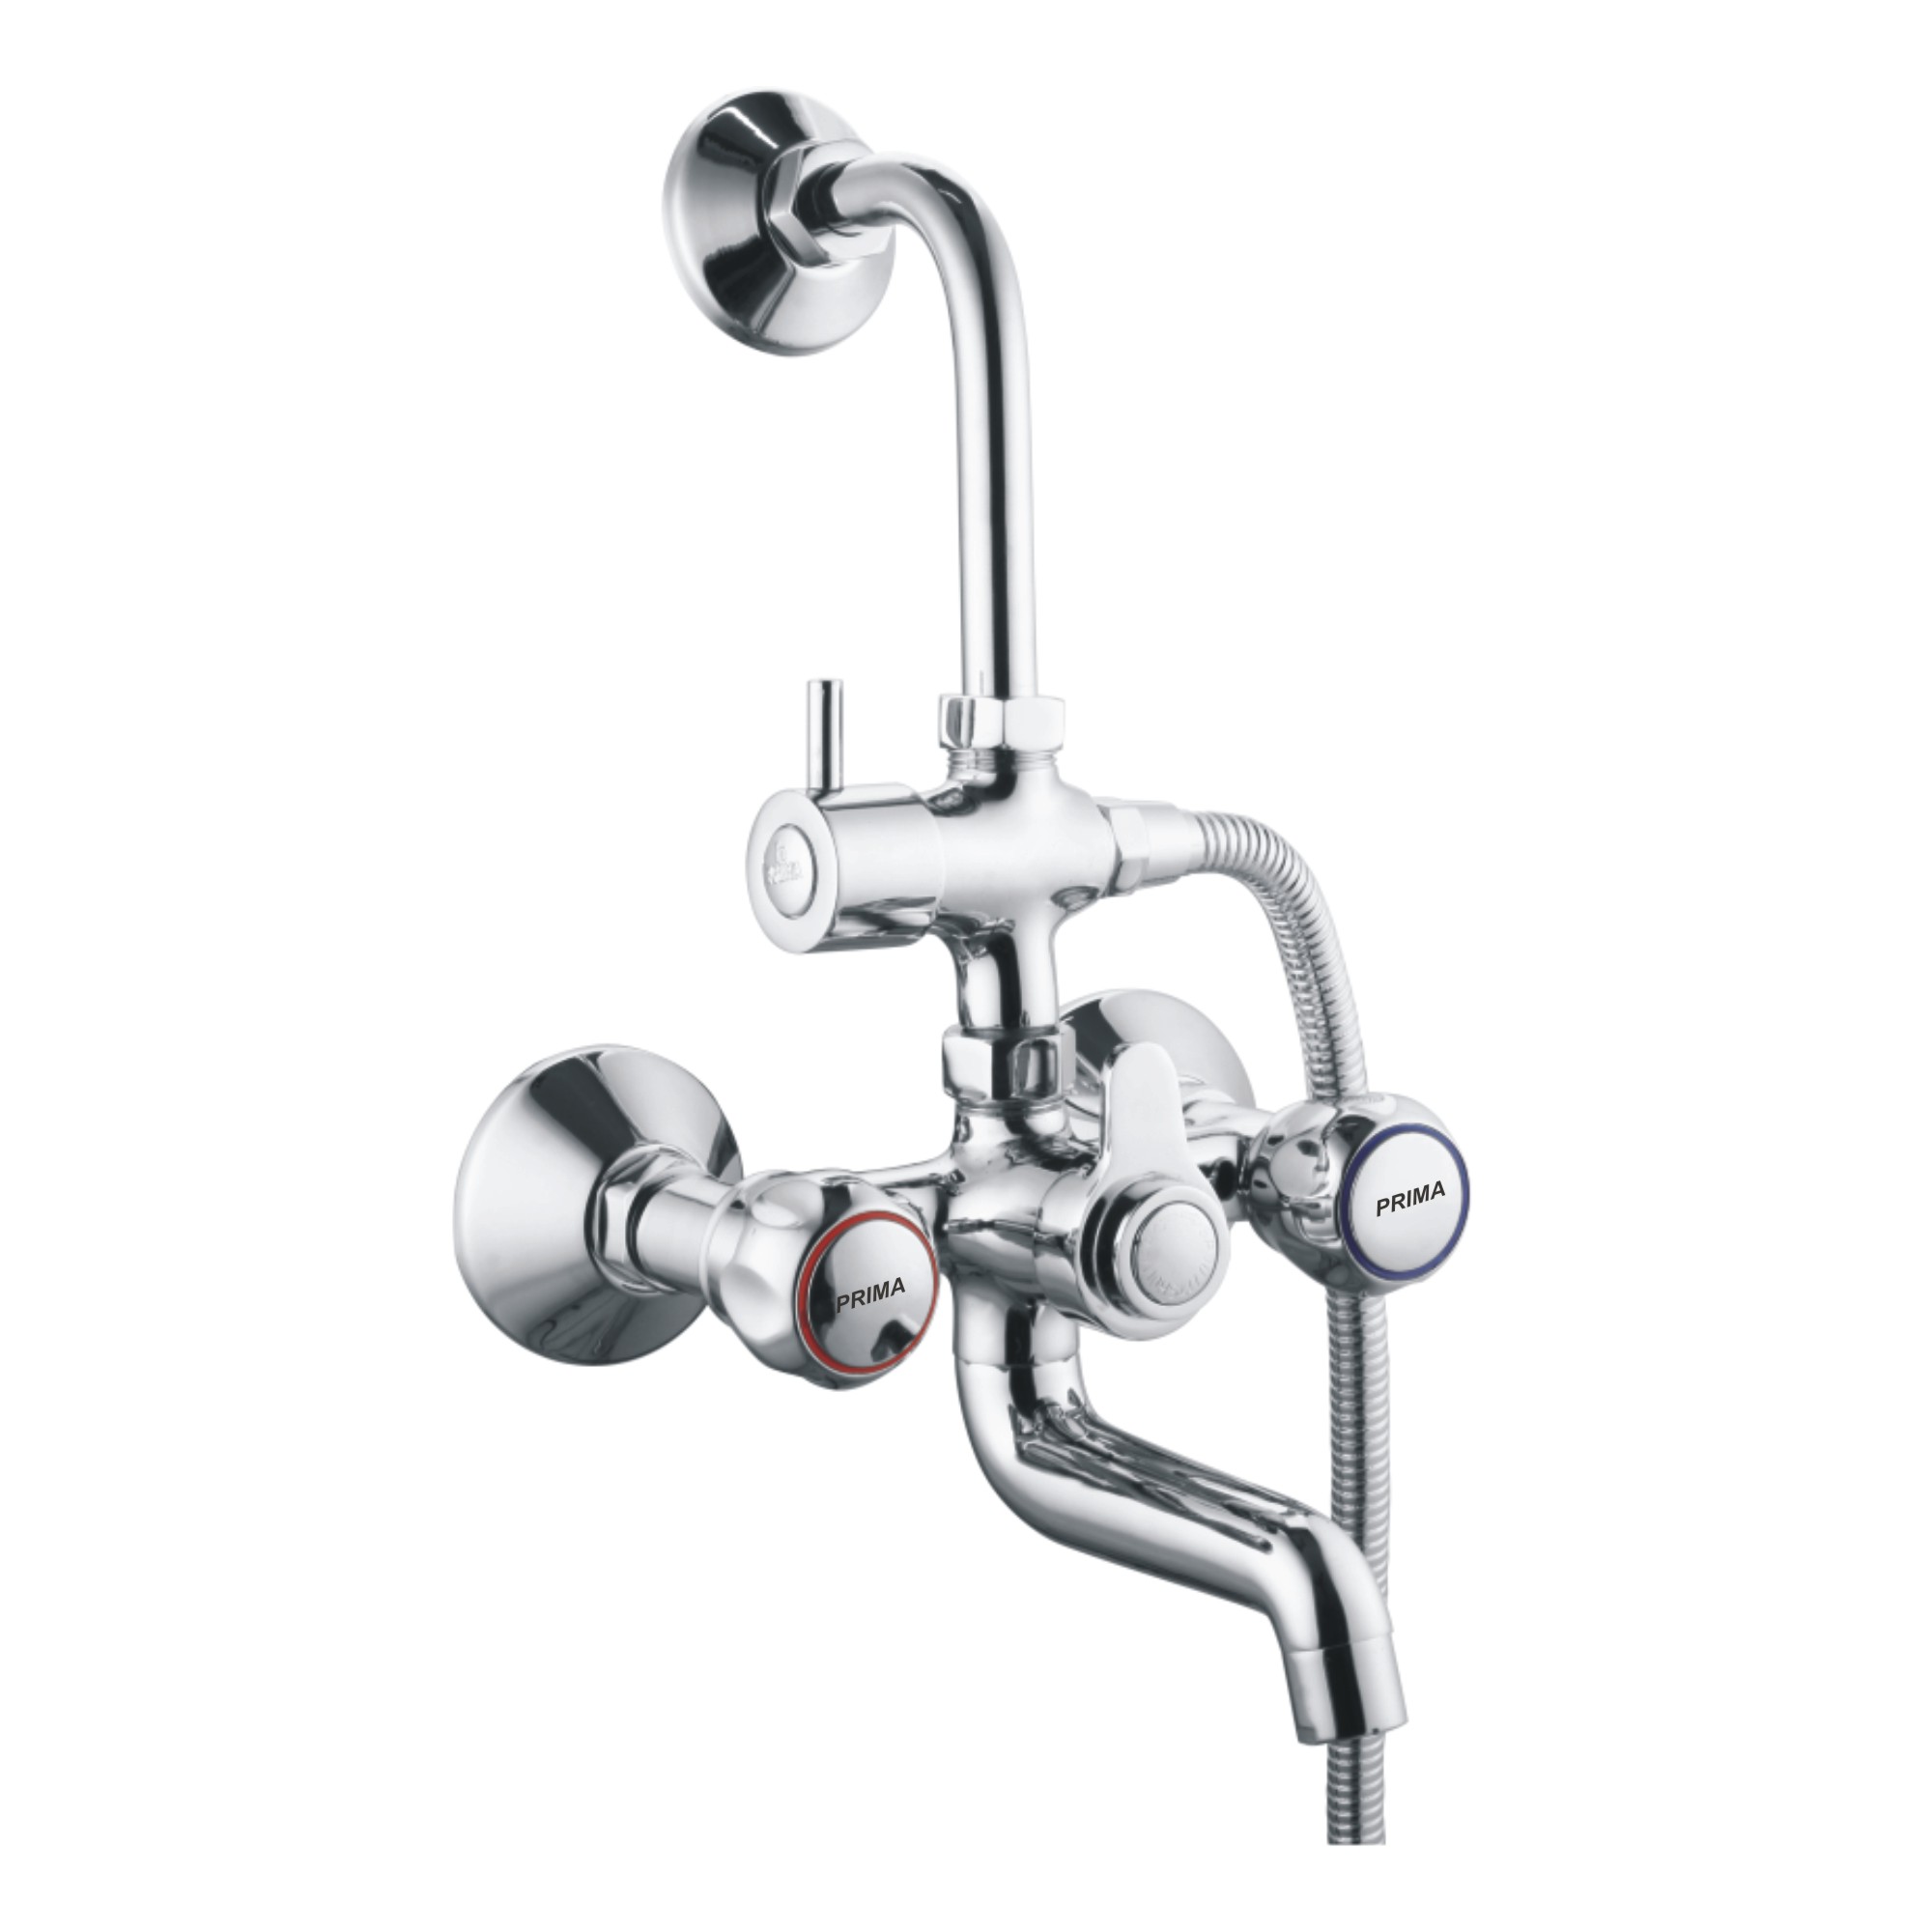 C.P Wall Mixer  3 in 1 System with L Bend Set